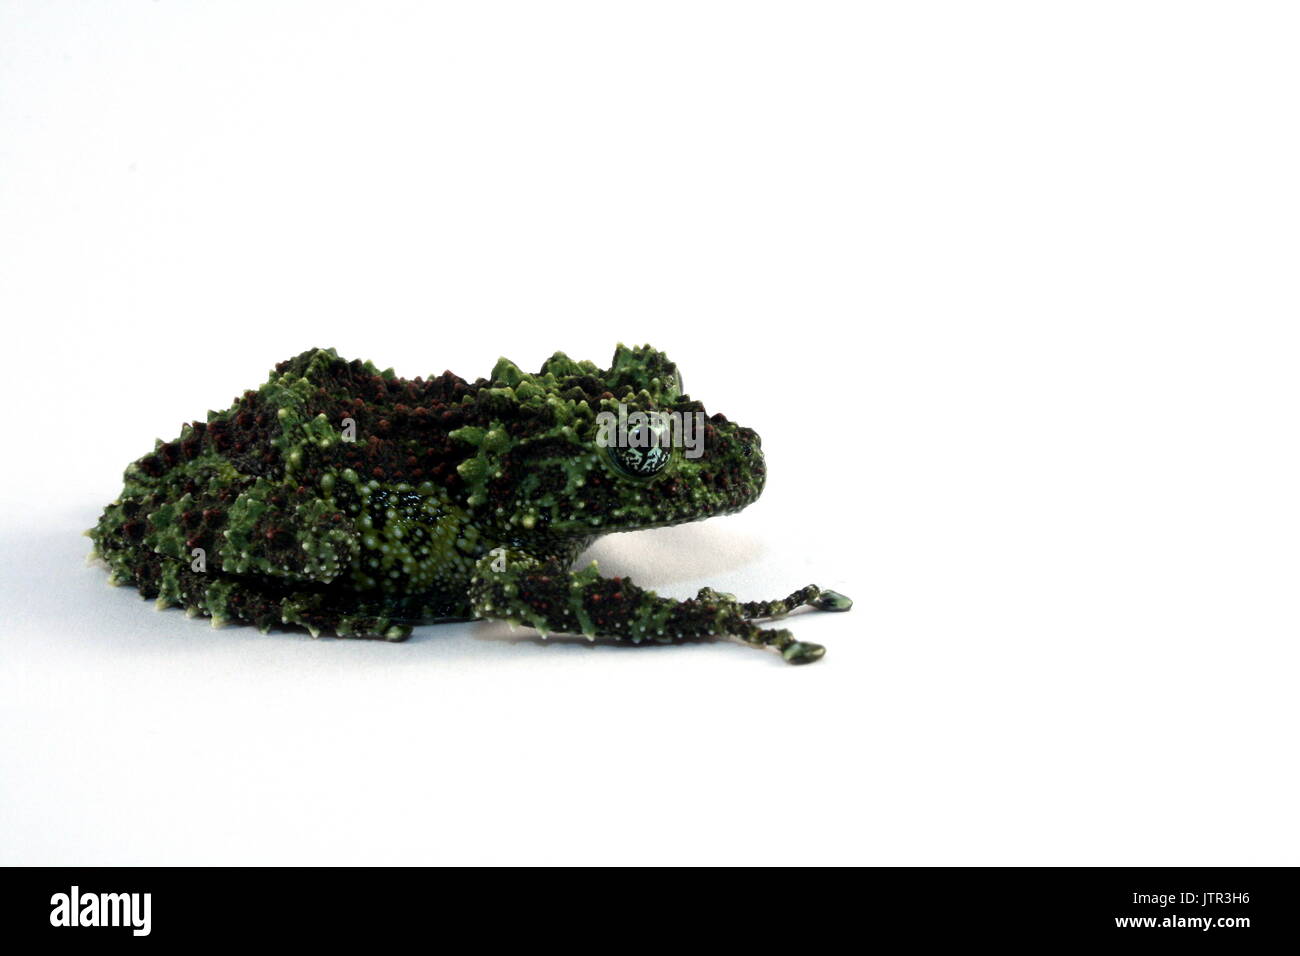 Vietnamese Mossy Frog, Therloderma corticale, on white background, Vietnam, Captive Stock Photo